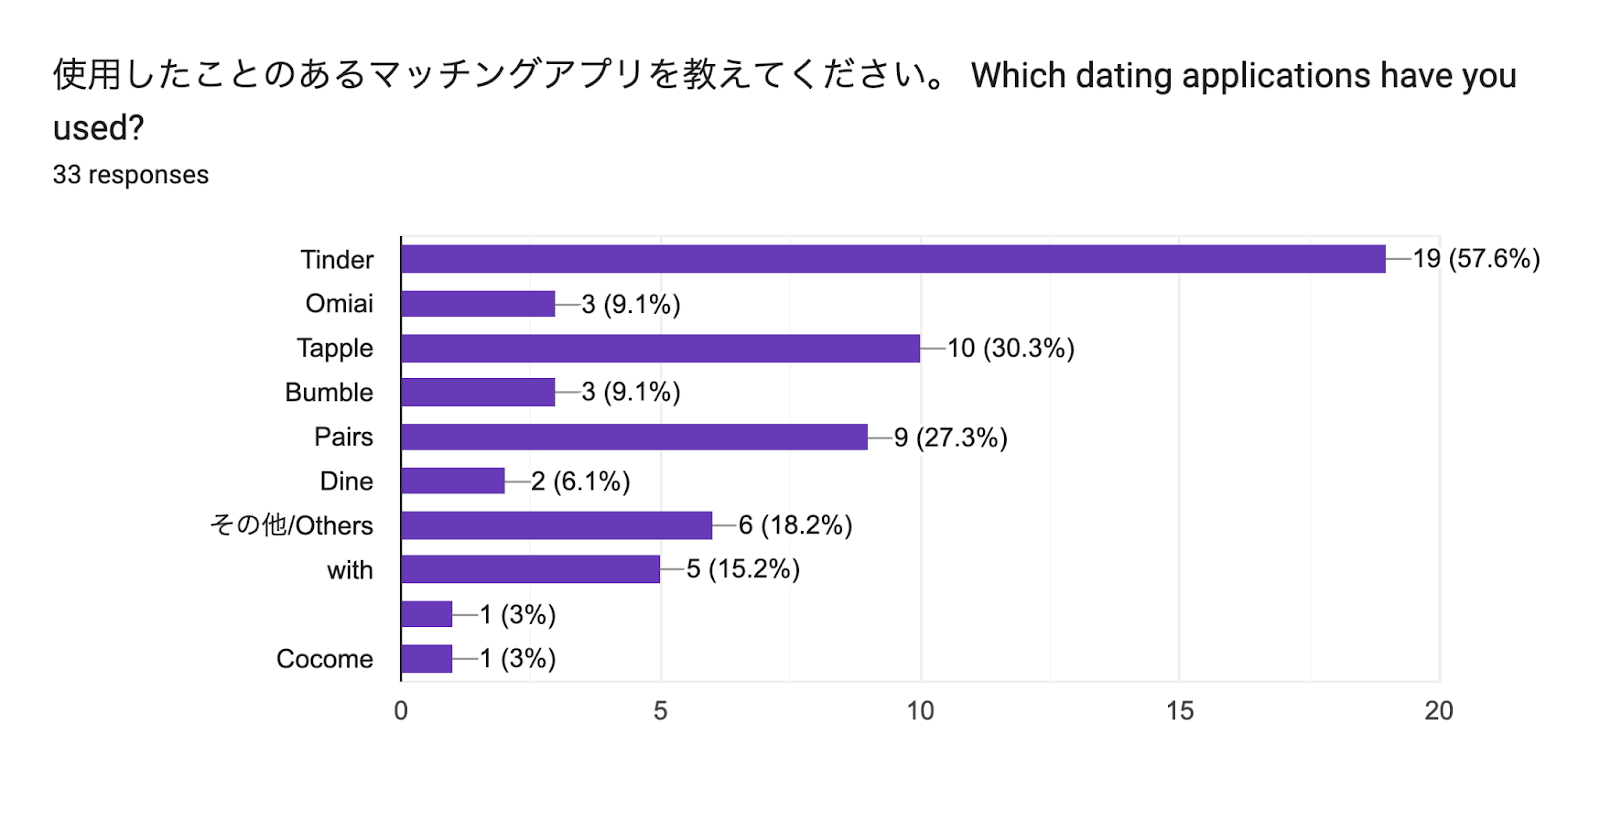 Forms response chart. Question title: 使用したことのあるマッチングアプリを教えてください。
Which dating applications have you used?
. Number of responses: 33 responses.